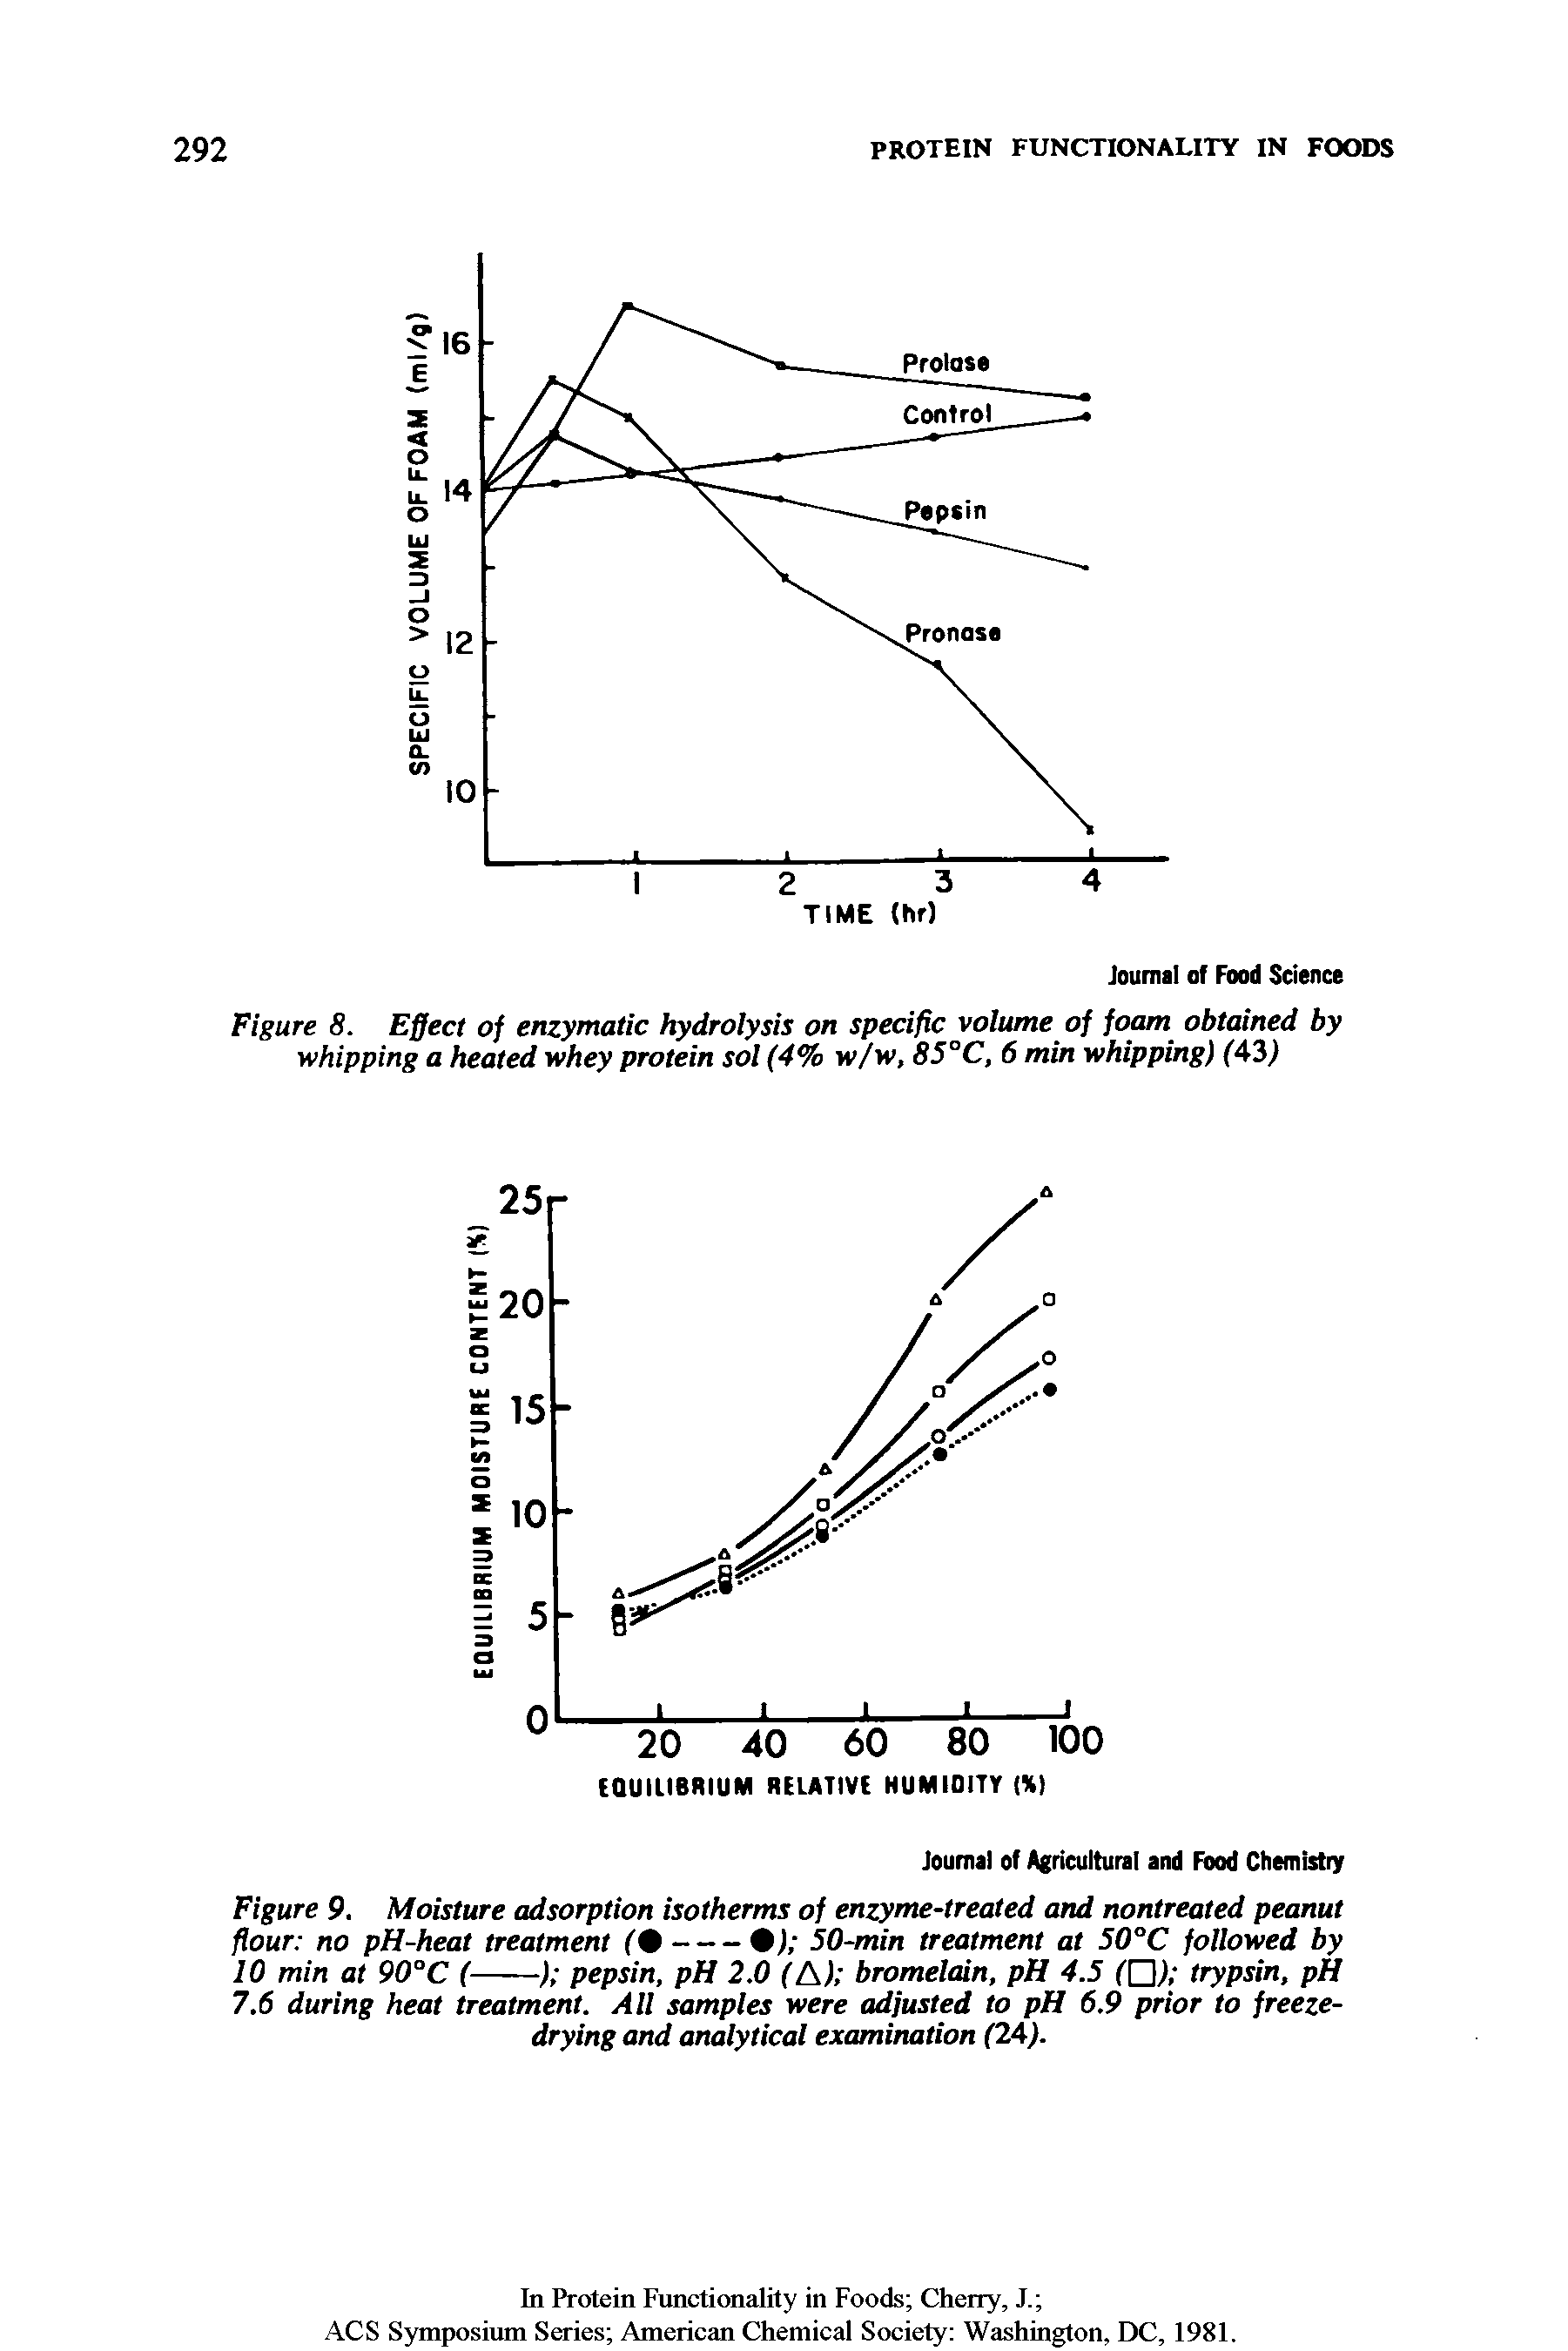 Figure 8. Effect of enzymatic hydrolysis on specific volume of foam obtained by whipping a heated whey protein sol (4% w/w, 85°C, 6 min whipping) (43)...